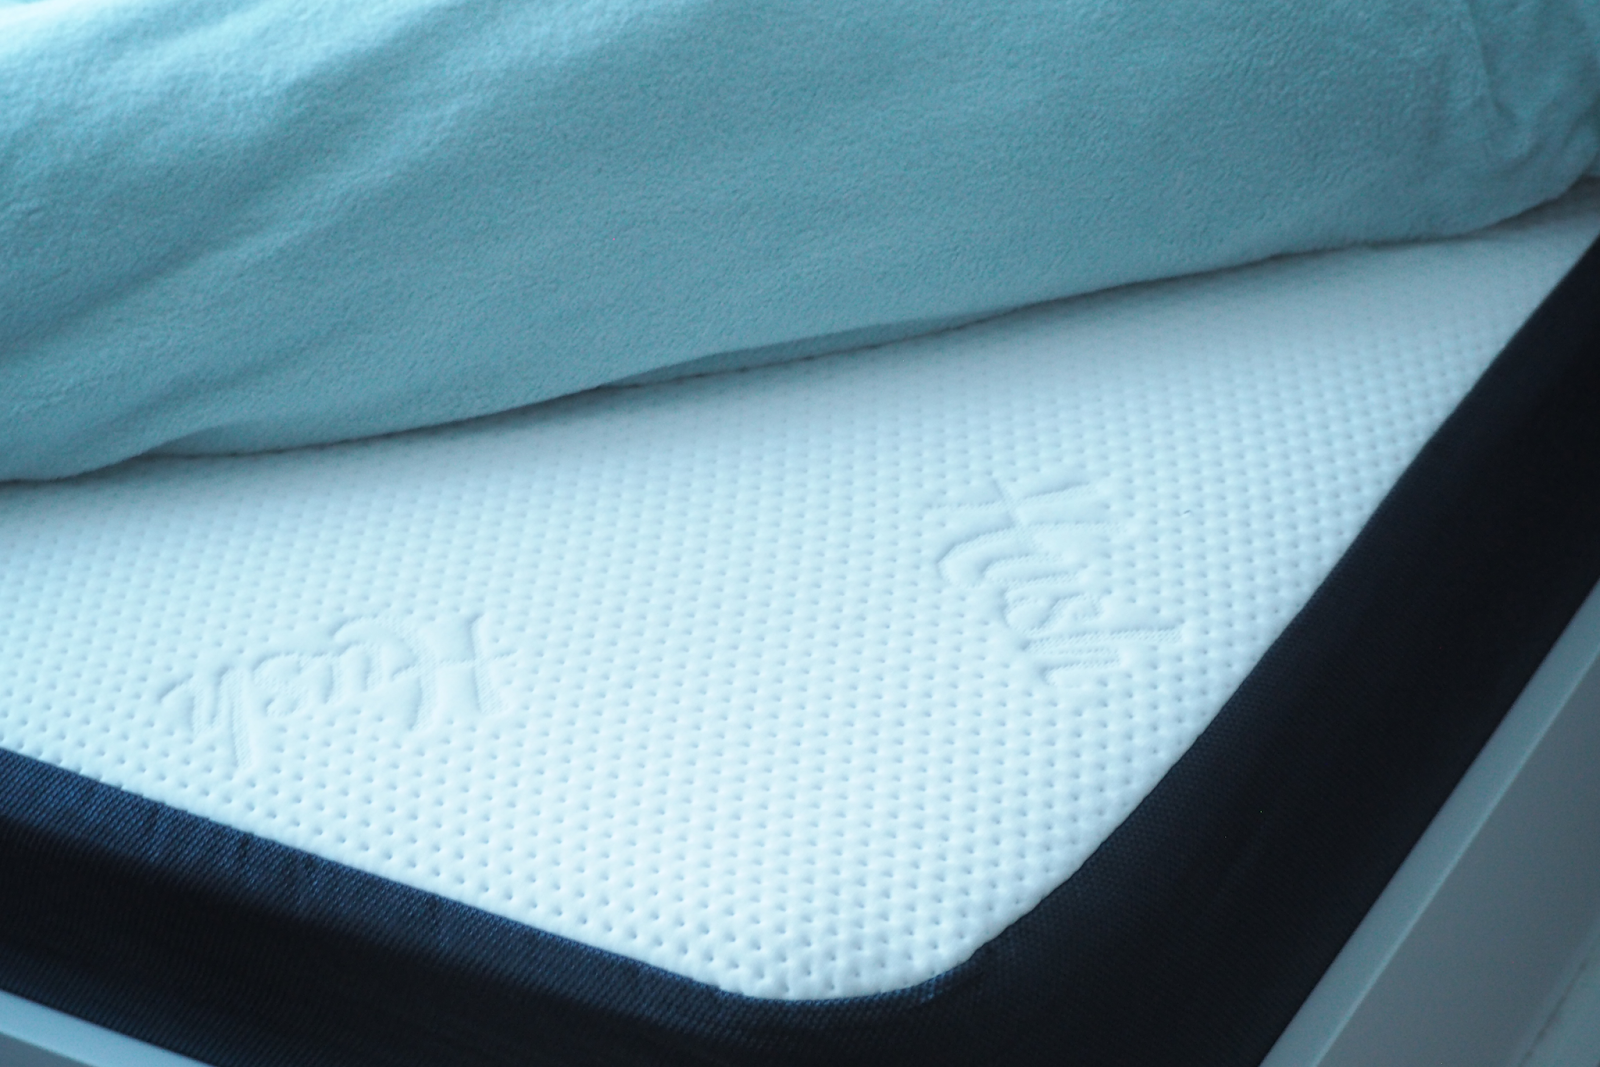 A Real Night's Rest | Hush Sleep Mattress Review With Airsprung